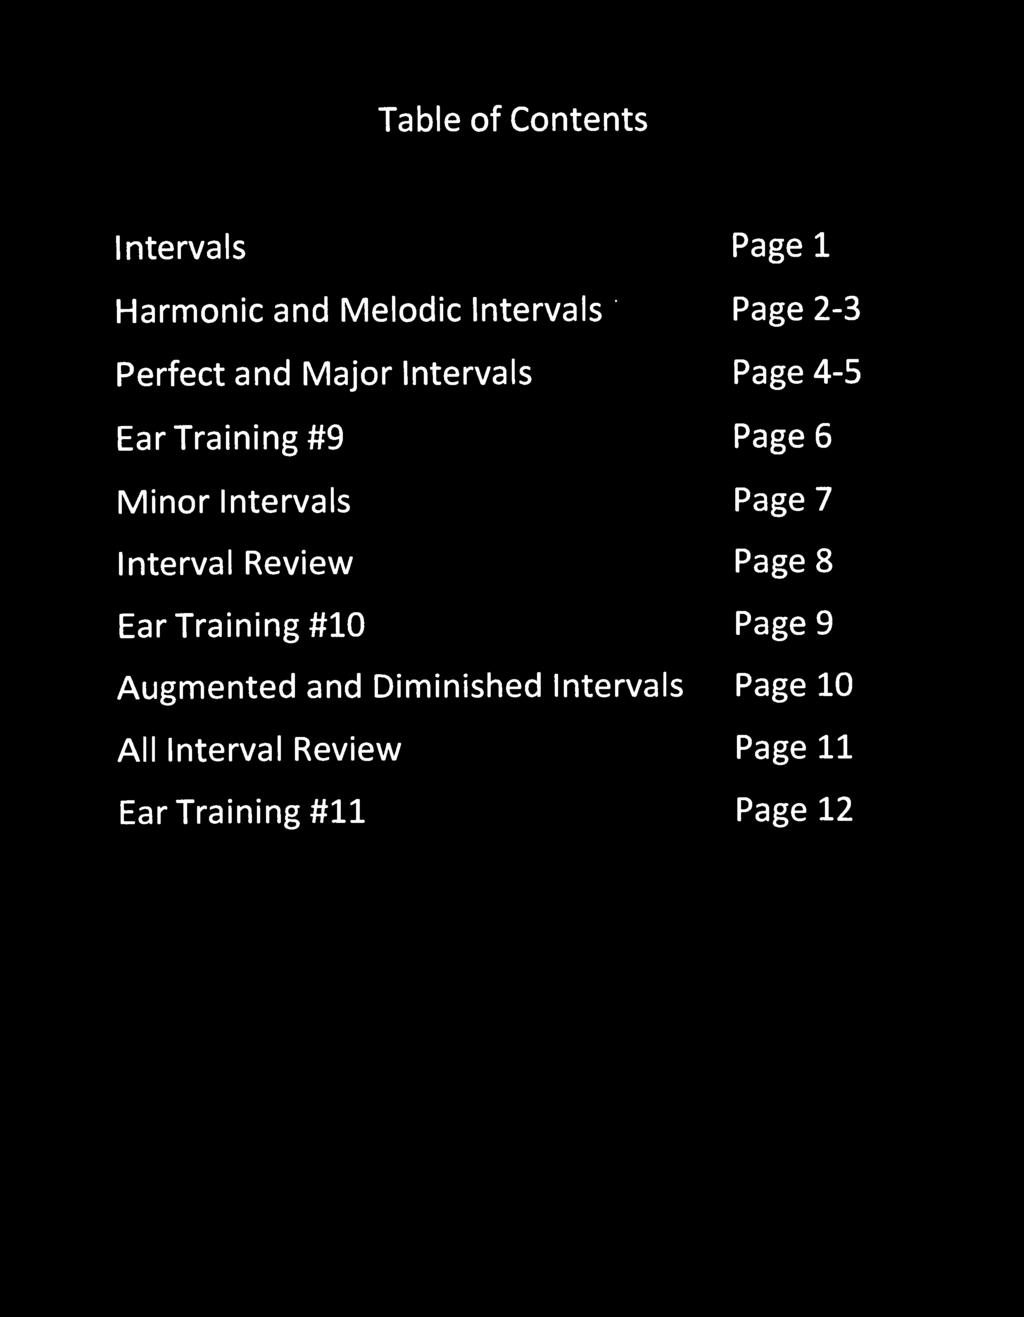 Page 7 nterval Review Page 8 Ear Training #1 Page 9 Augmented and